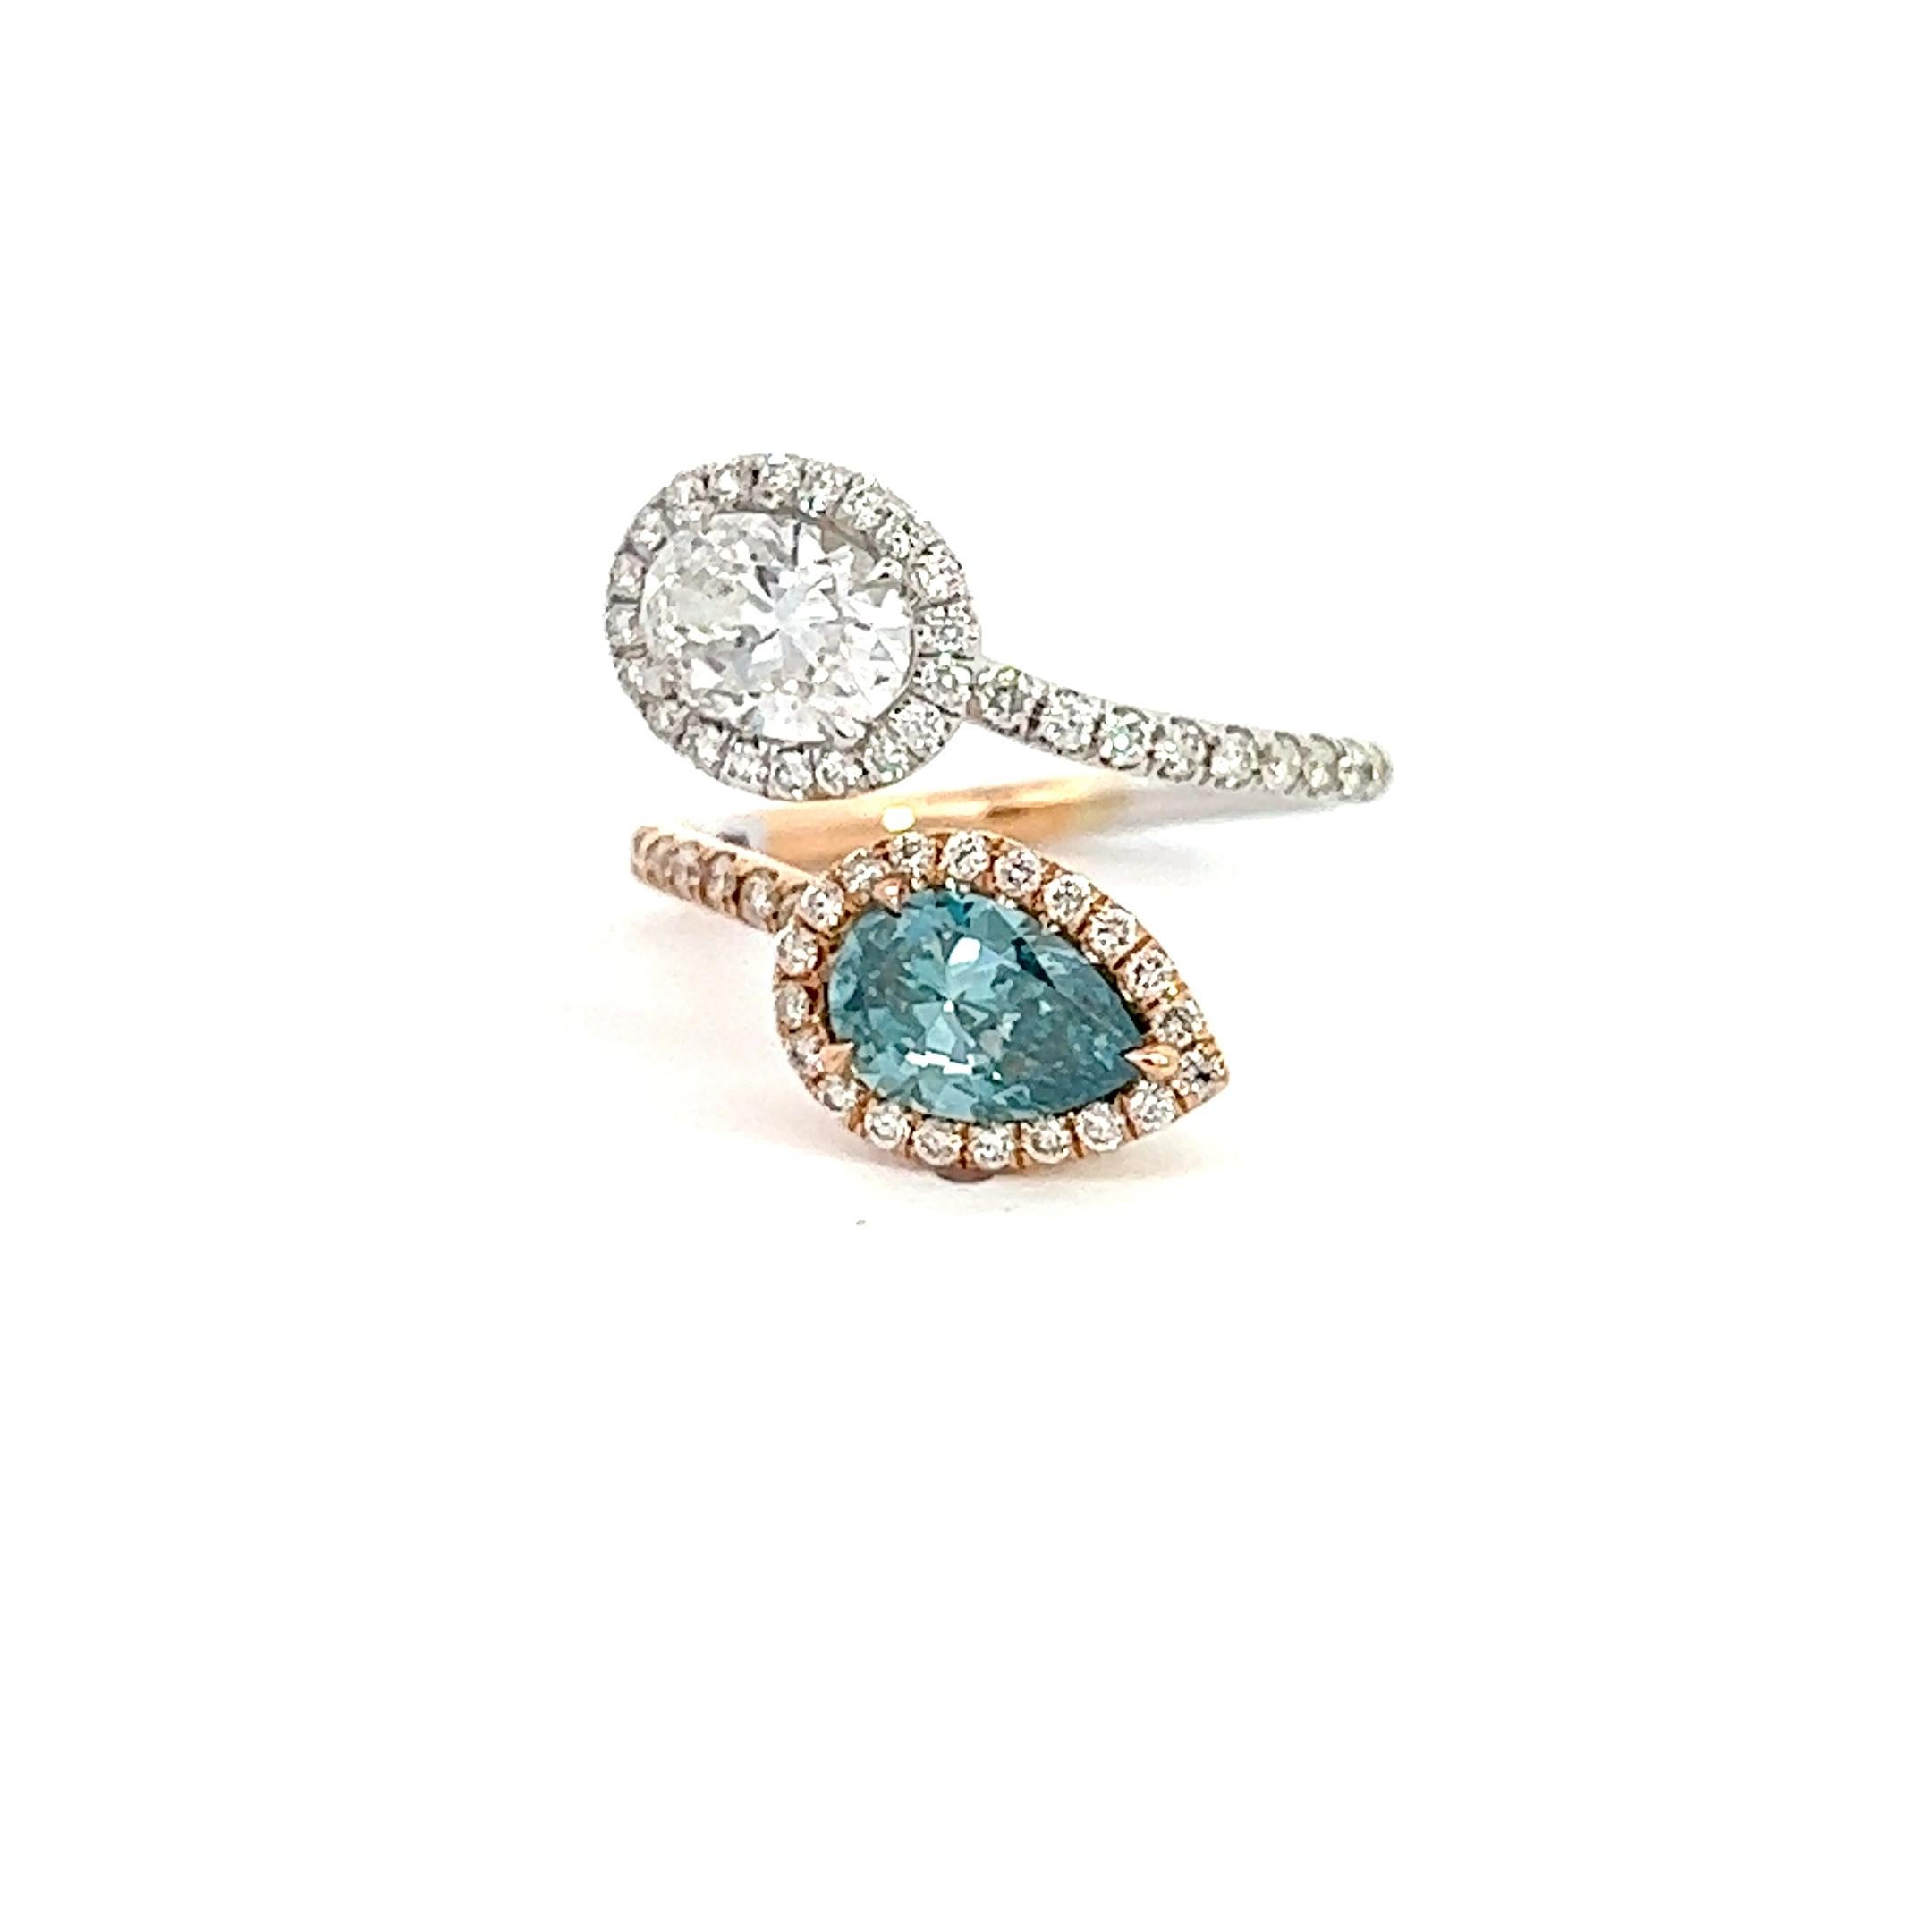 Experience the unmatched beauty of a rare 1.03-Carat Earth Diamond Fancy Blue, Clarity VS2,  PEAR Diamond, expertly accented with round brilliant diamonds and set in lustrous 18K Rose Gold. Then, to make this ring elevate your style even further it